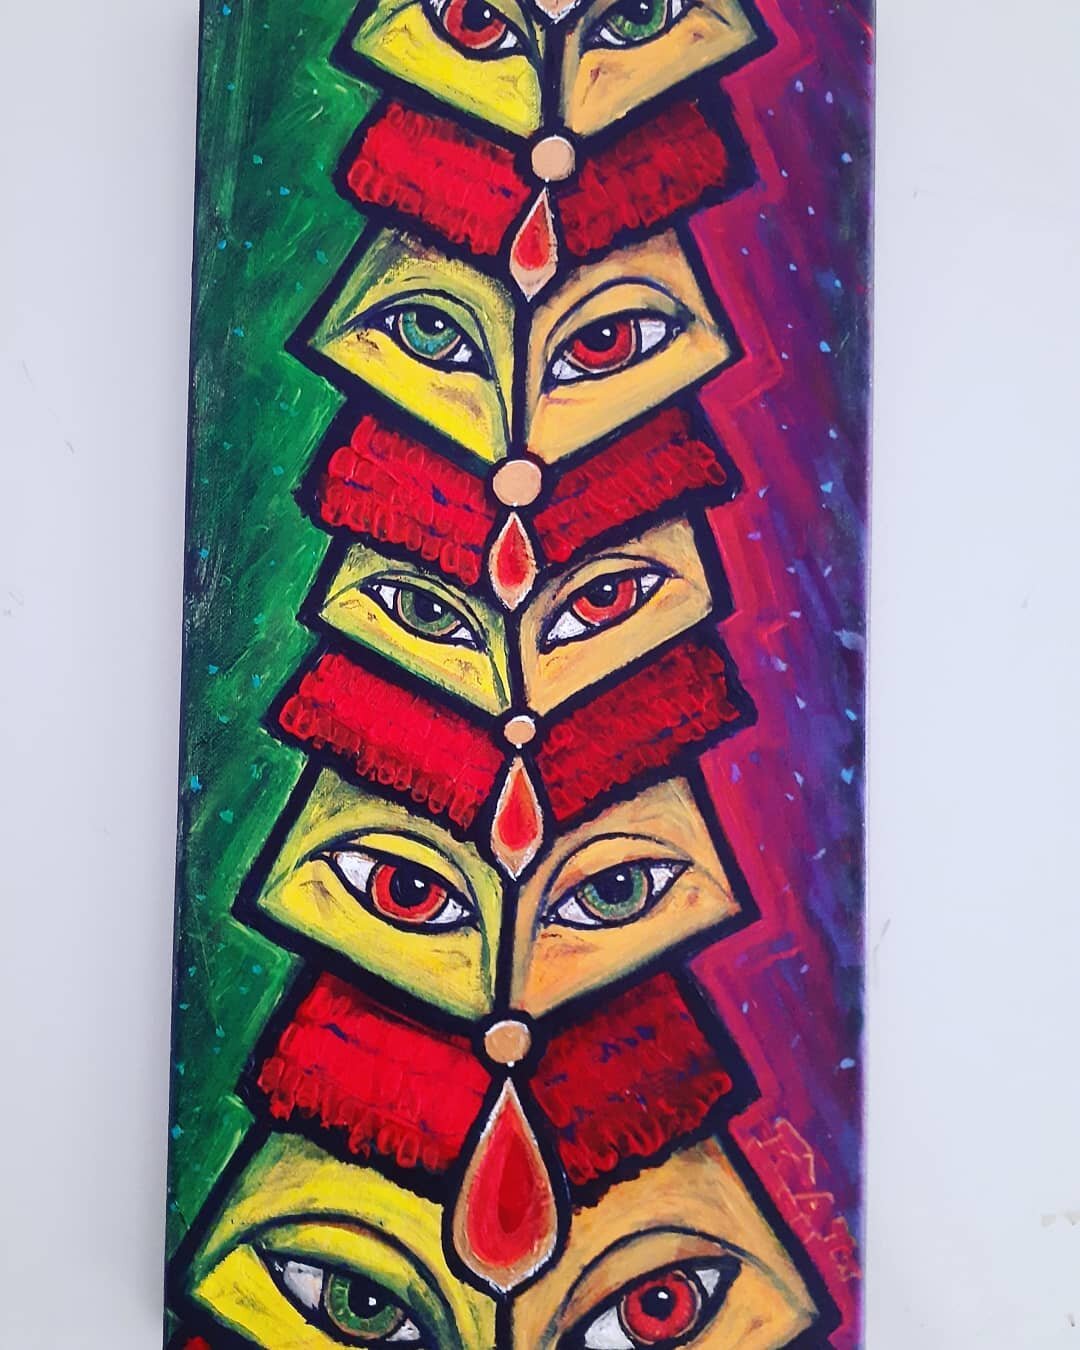 Eye Totem pt. I 
Acrylic on Canvas
10&quot;x20&quot;&times;5/8&quot;
Asking $100. DM me if you're interested. 

The idea is there's a four sided totem of eyes which are chained together vertically. Each face/eye has it's own free will to look anywher